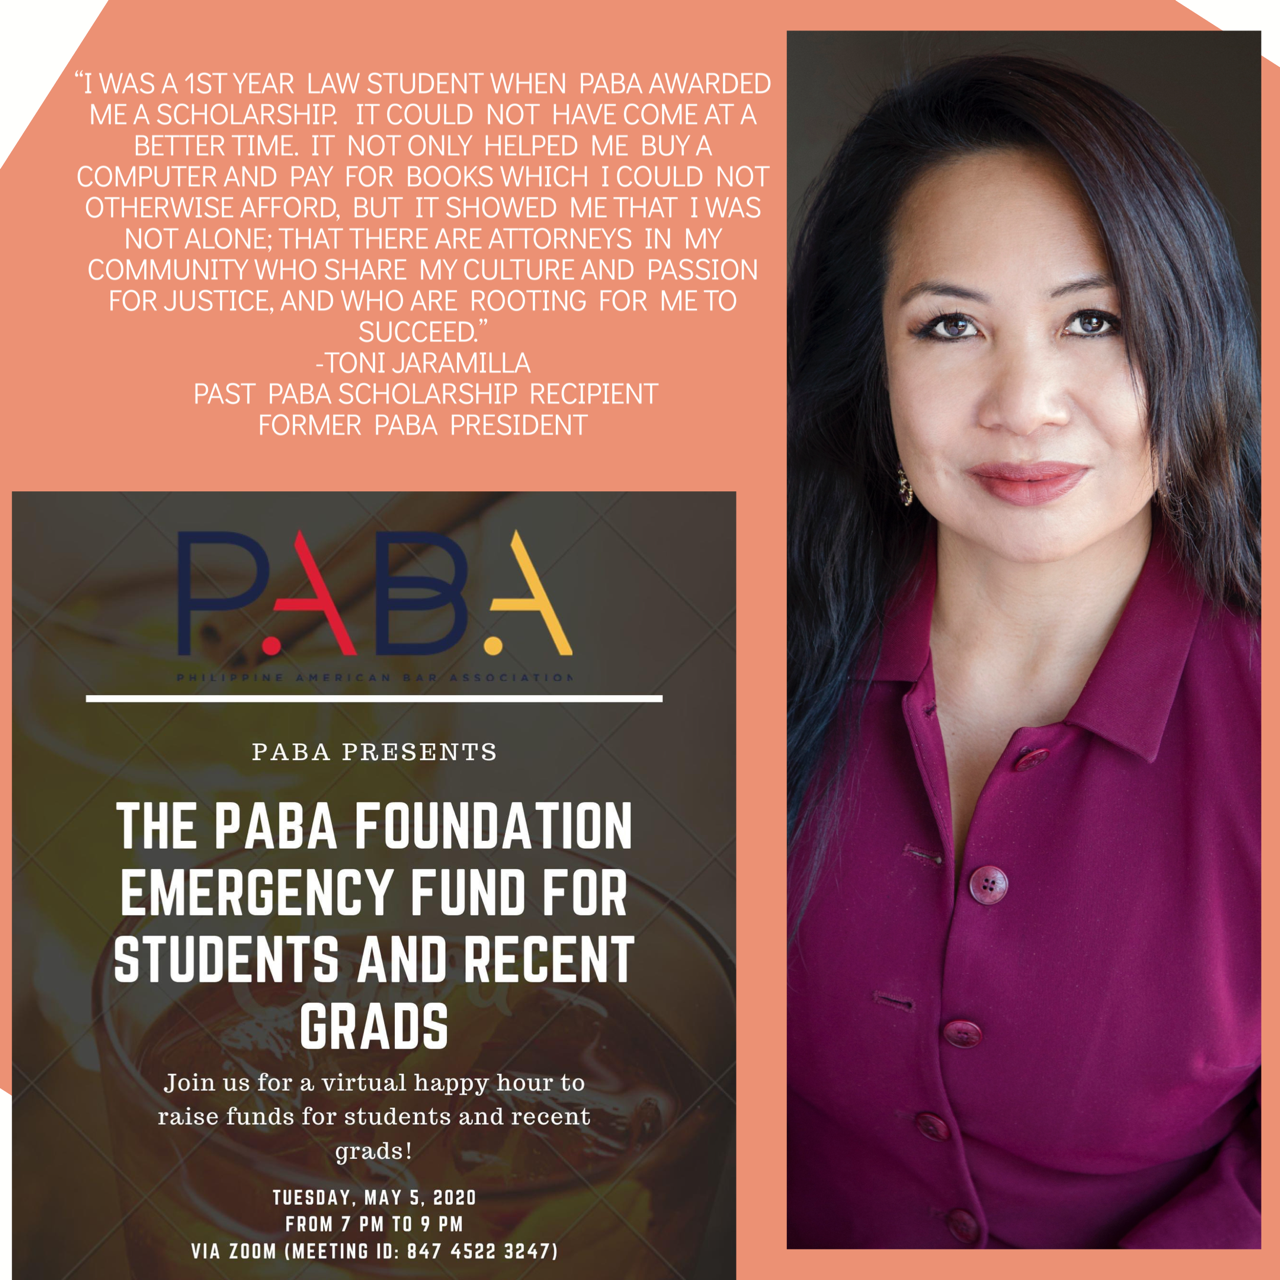 The PABA Foundation Emergency Fund for Students and Recent Grads